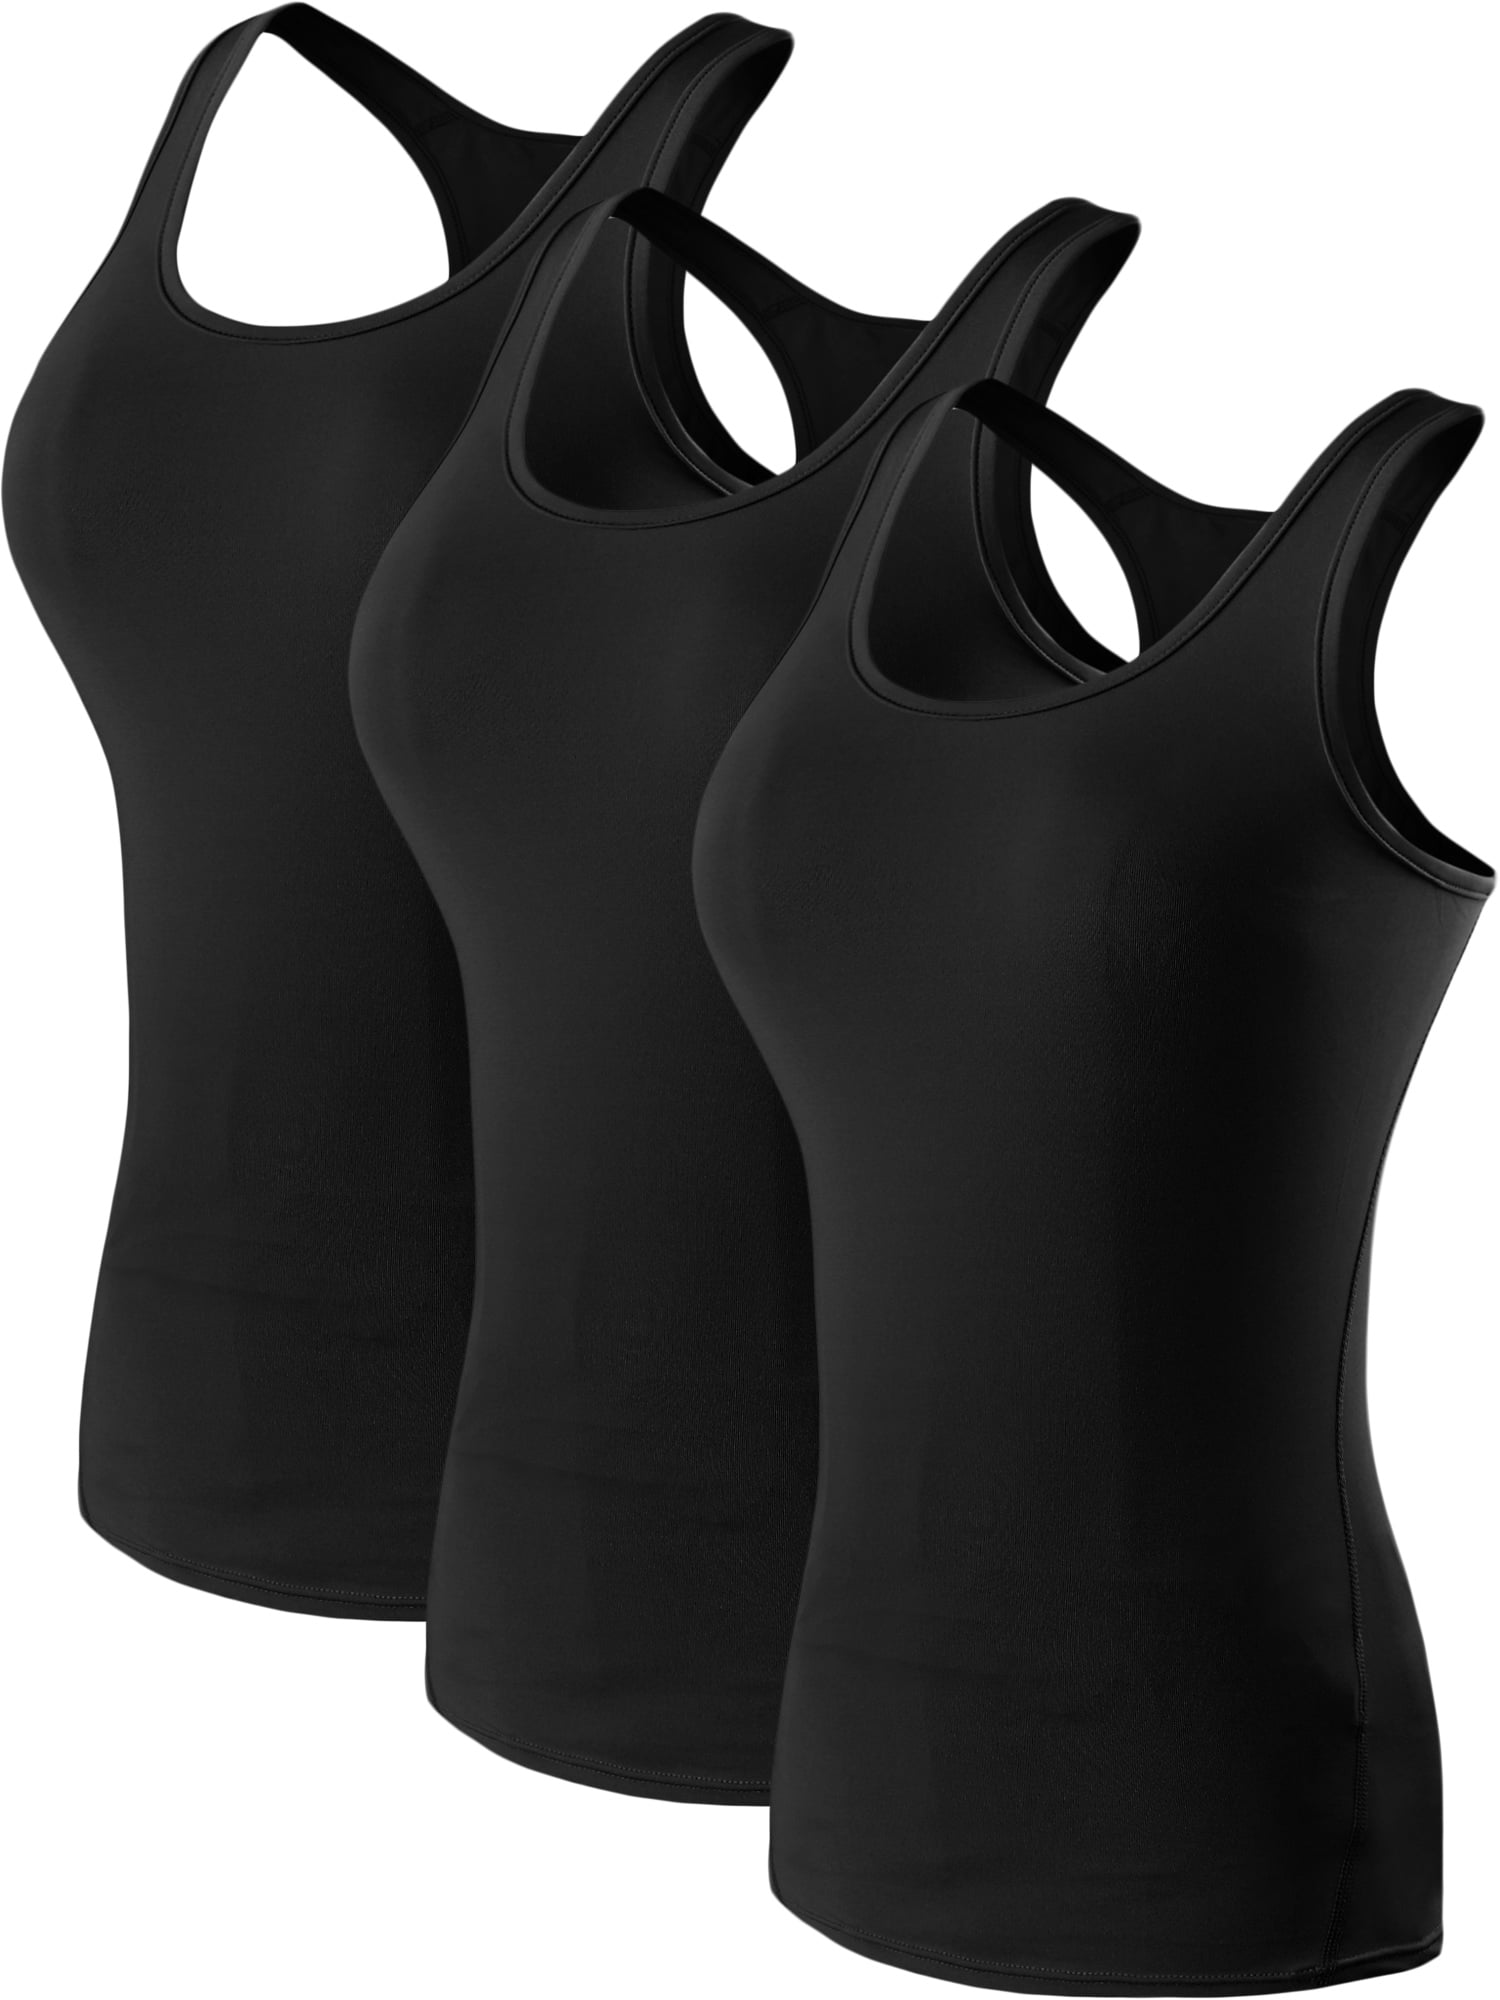 NELEUS Womens Compression Base Layer Dry Fit Tank Top 3 Pack,Blue+